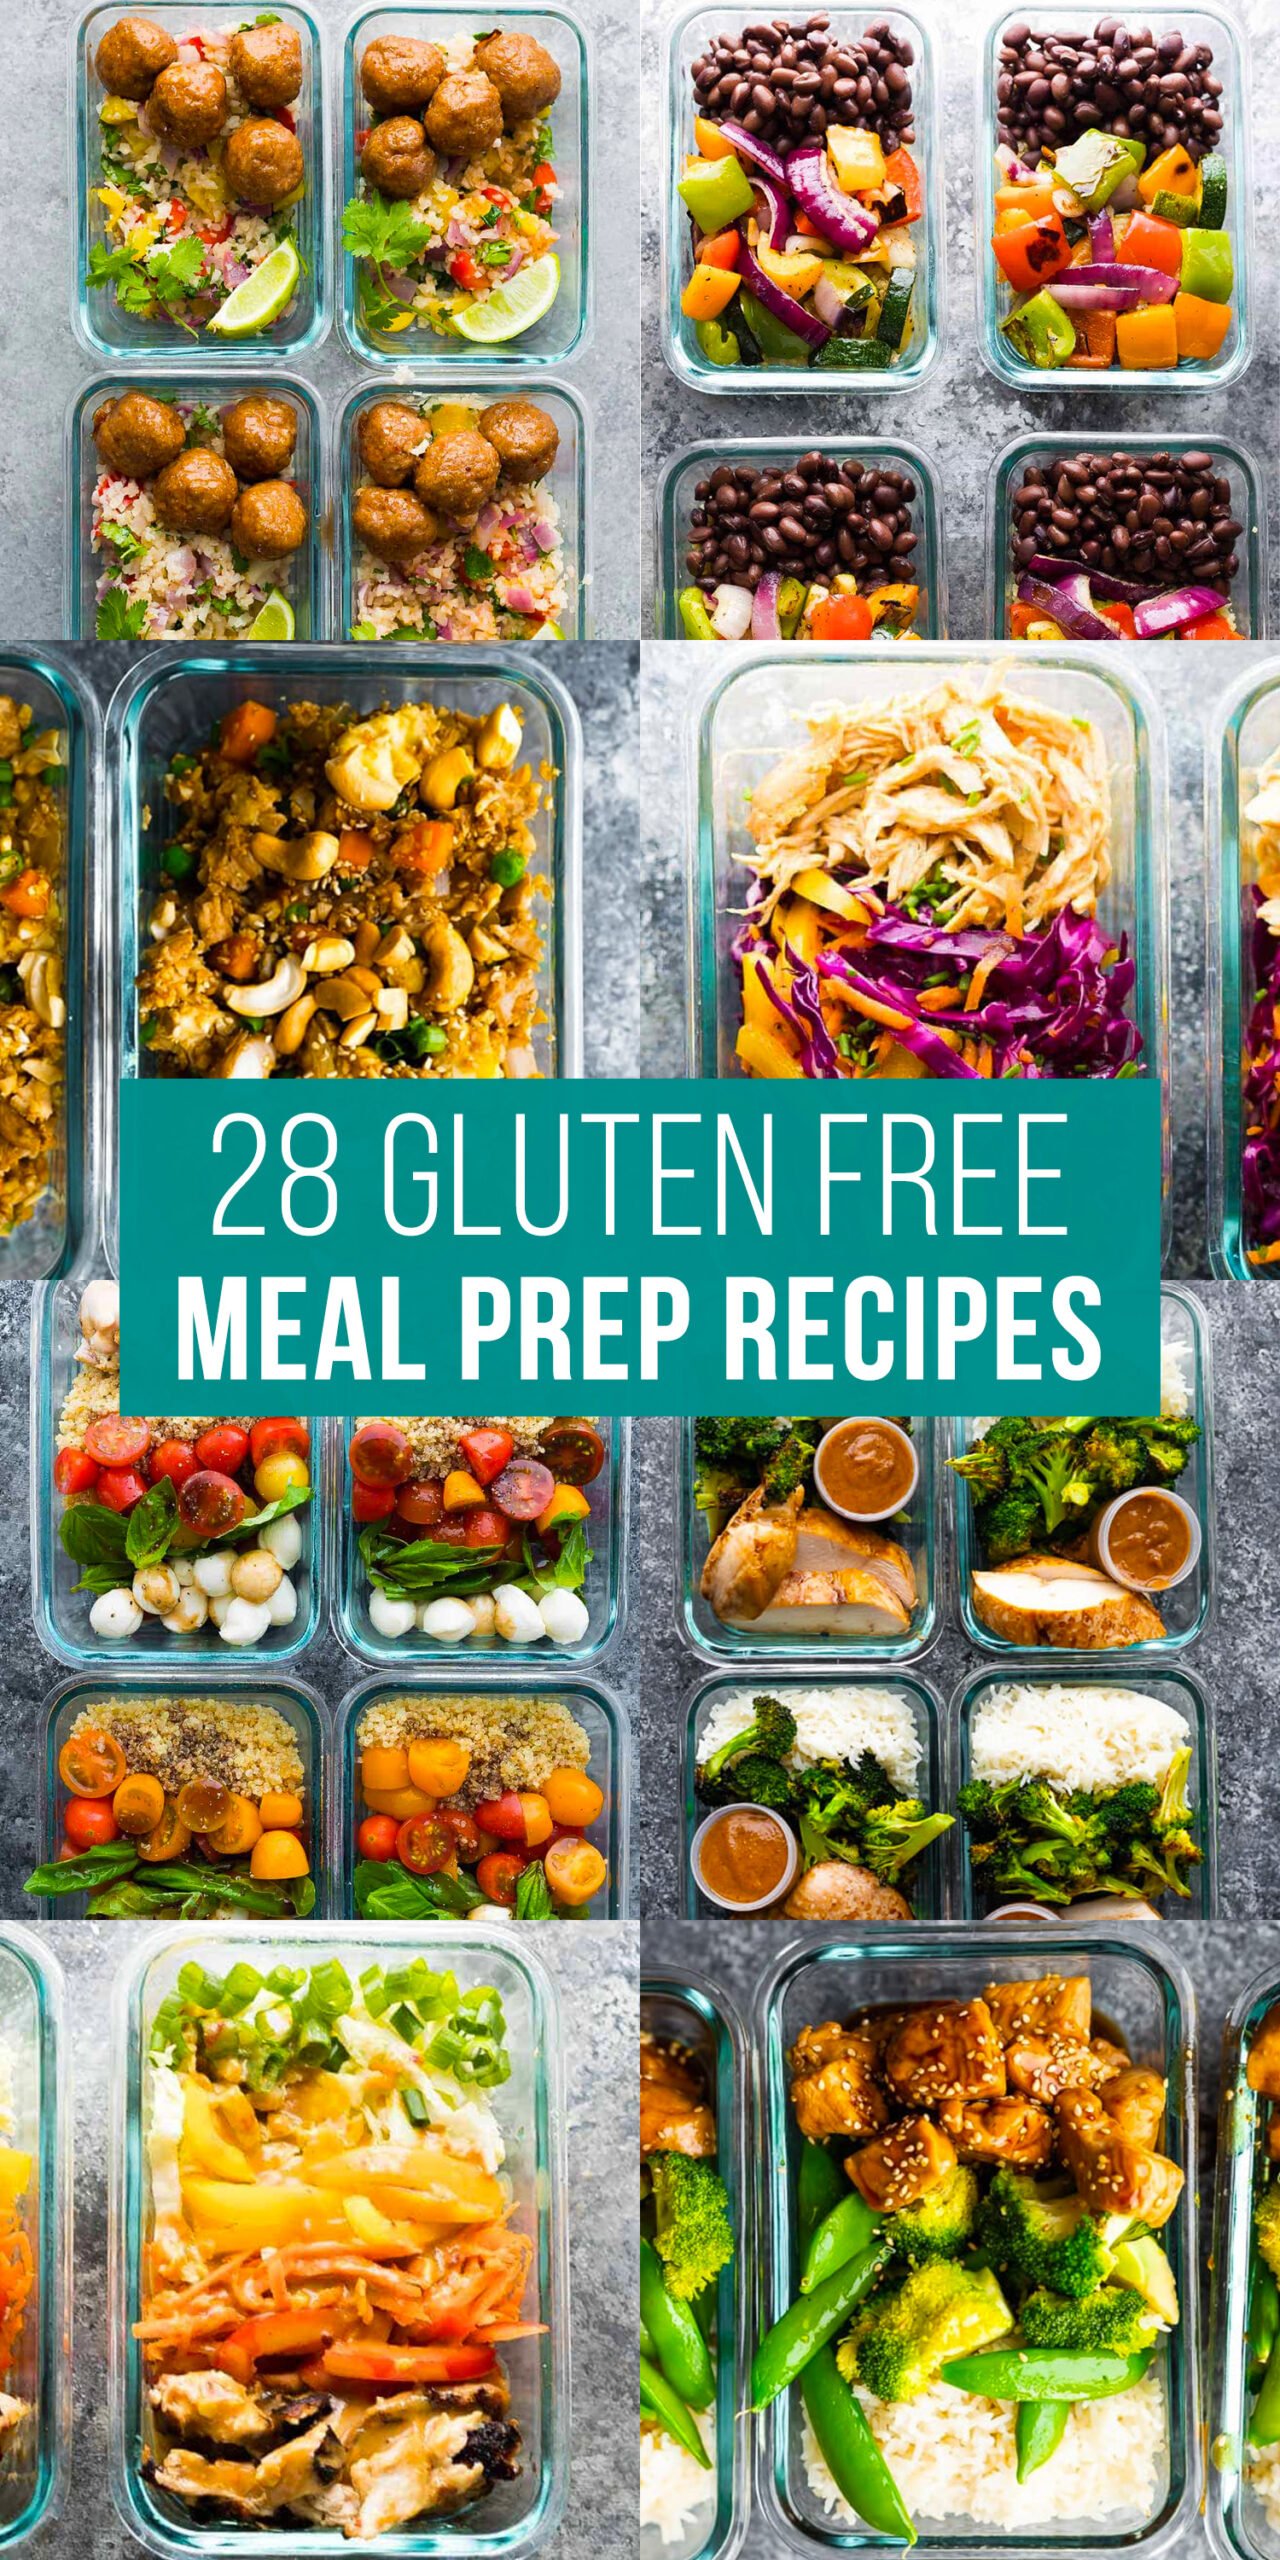 image graphic with text reading: 28 gluten free meal prep recipes